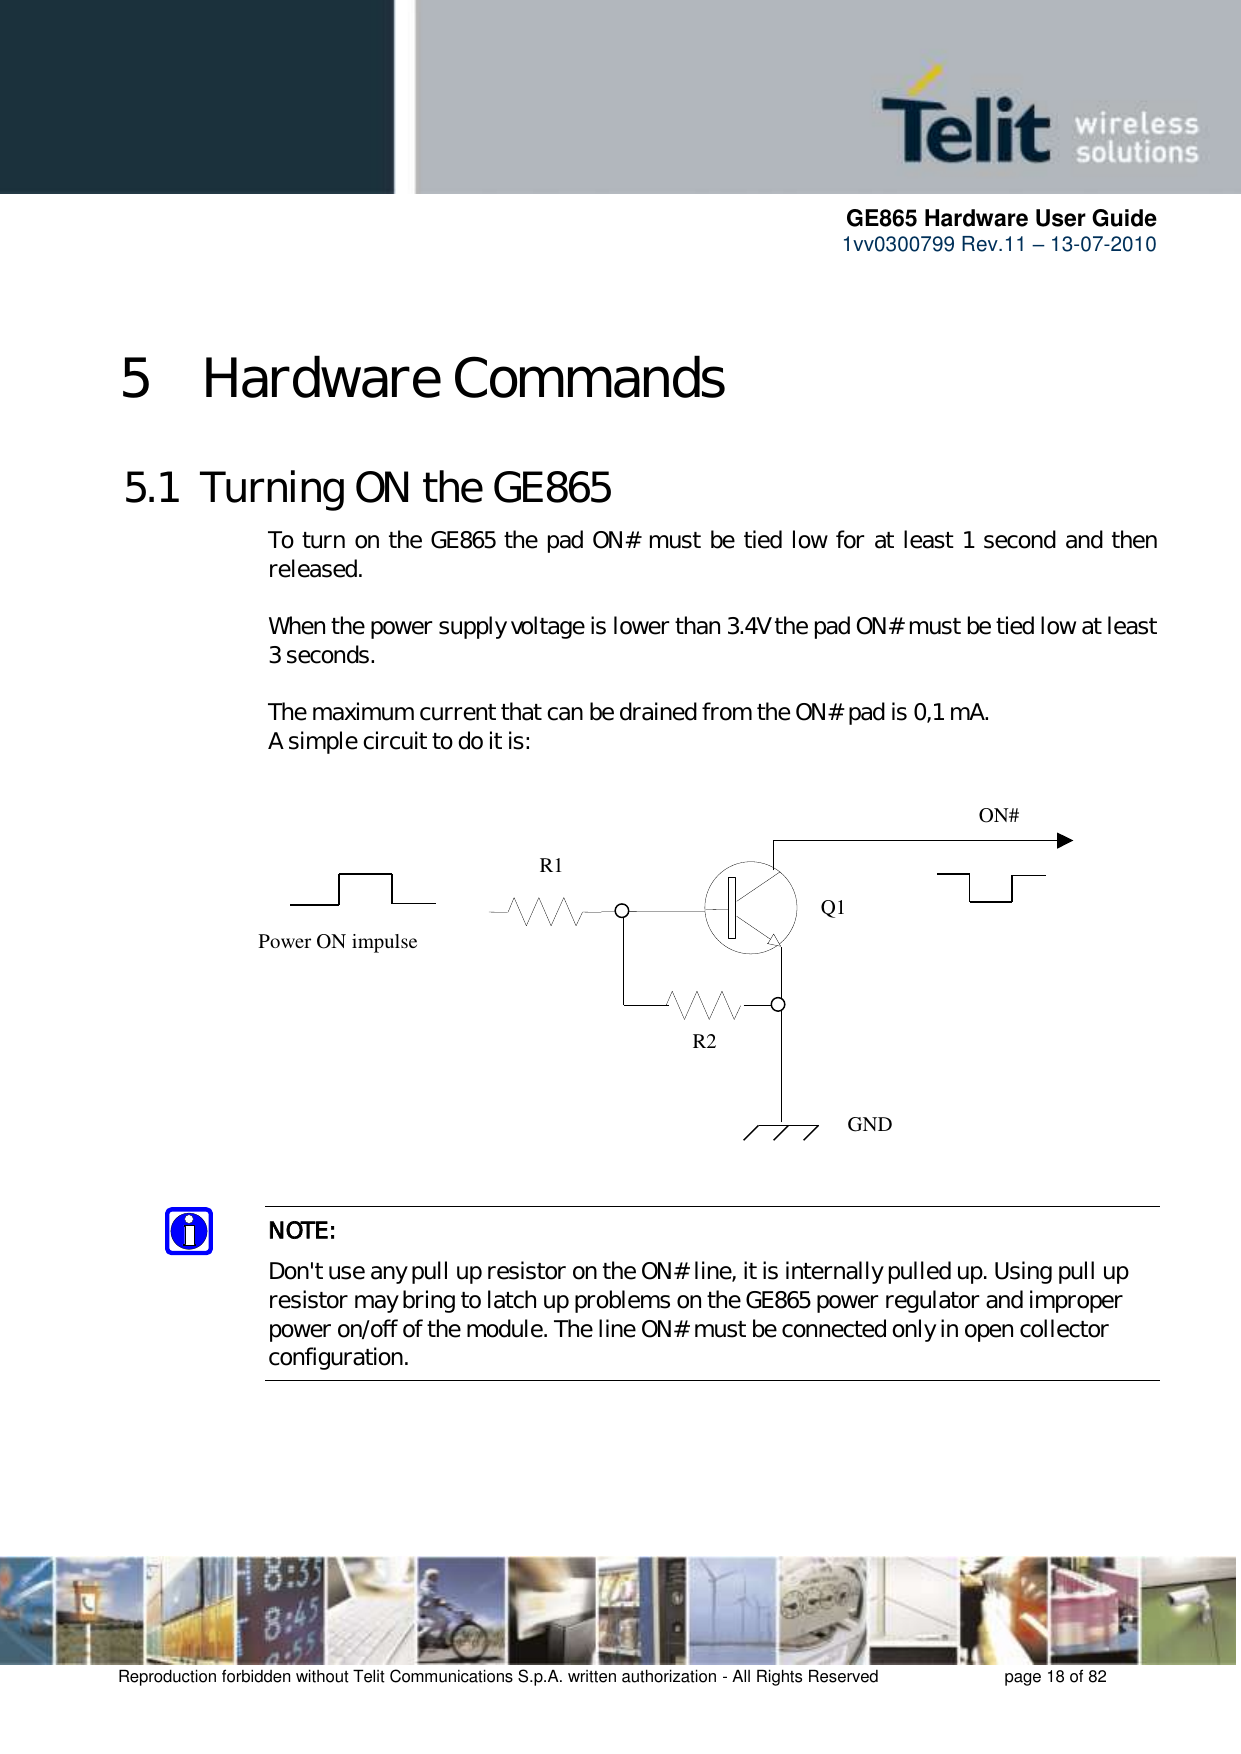      GE865 Hardware User Guide 1vv0300799 Rev.11 – 13-07-2010       Reproduction forbidden without Telit Communications S.p.A. written authorization - All Rights Reserved    page 18 of 82  5 Hardware Commands 5.1  Turning ON the GE865 To turn on the GE865 the pad ON# must be tied low for at least 1 second and then released.  When the power supply voltage is lower than 3.4V the pad ON# must be tied low at least 3 seconds.  The maximum current that can be drained from the ON# pad is 0,1 mA. A simple circuit to do it is:   NOTE: Don&apos;t use any pull up resistor on the ON# line, it is internally pulled up. Using pull up resistor may bring to latch up problems on the GE865 power regulator and improper power on/off of the module. The line ON# must be connected only in open collector configuration.    ON#Power ON impulse  GNDR1R2Q1